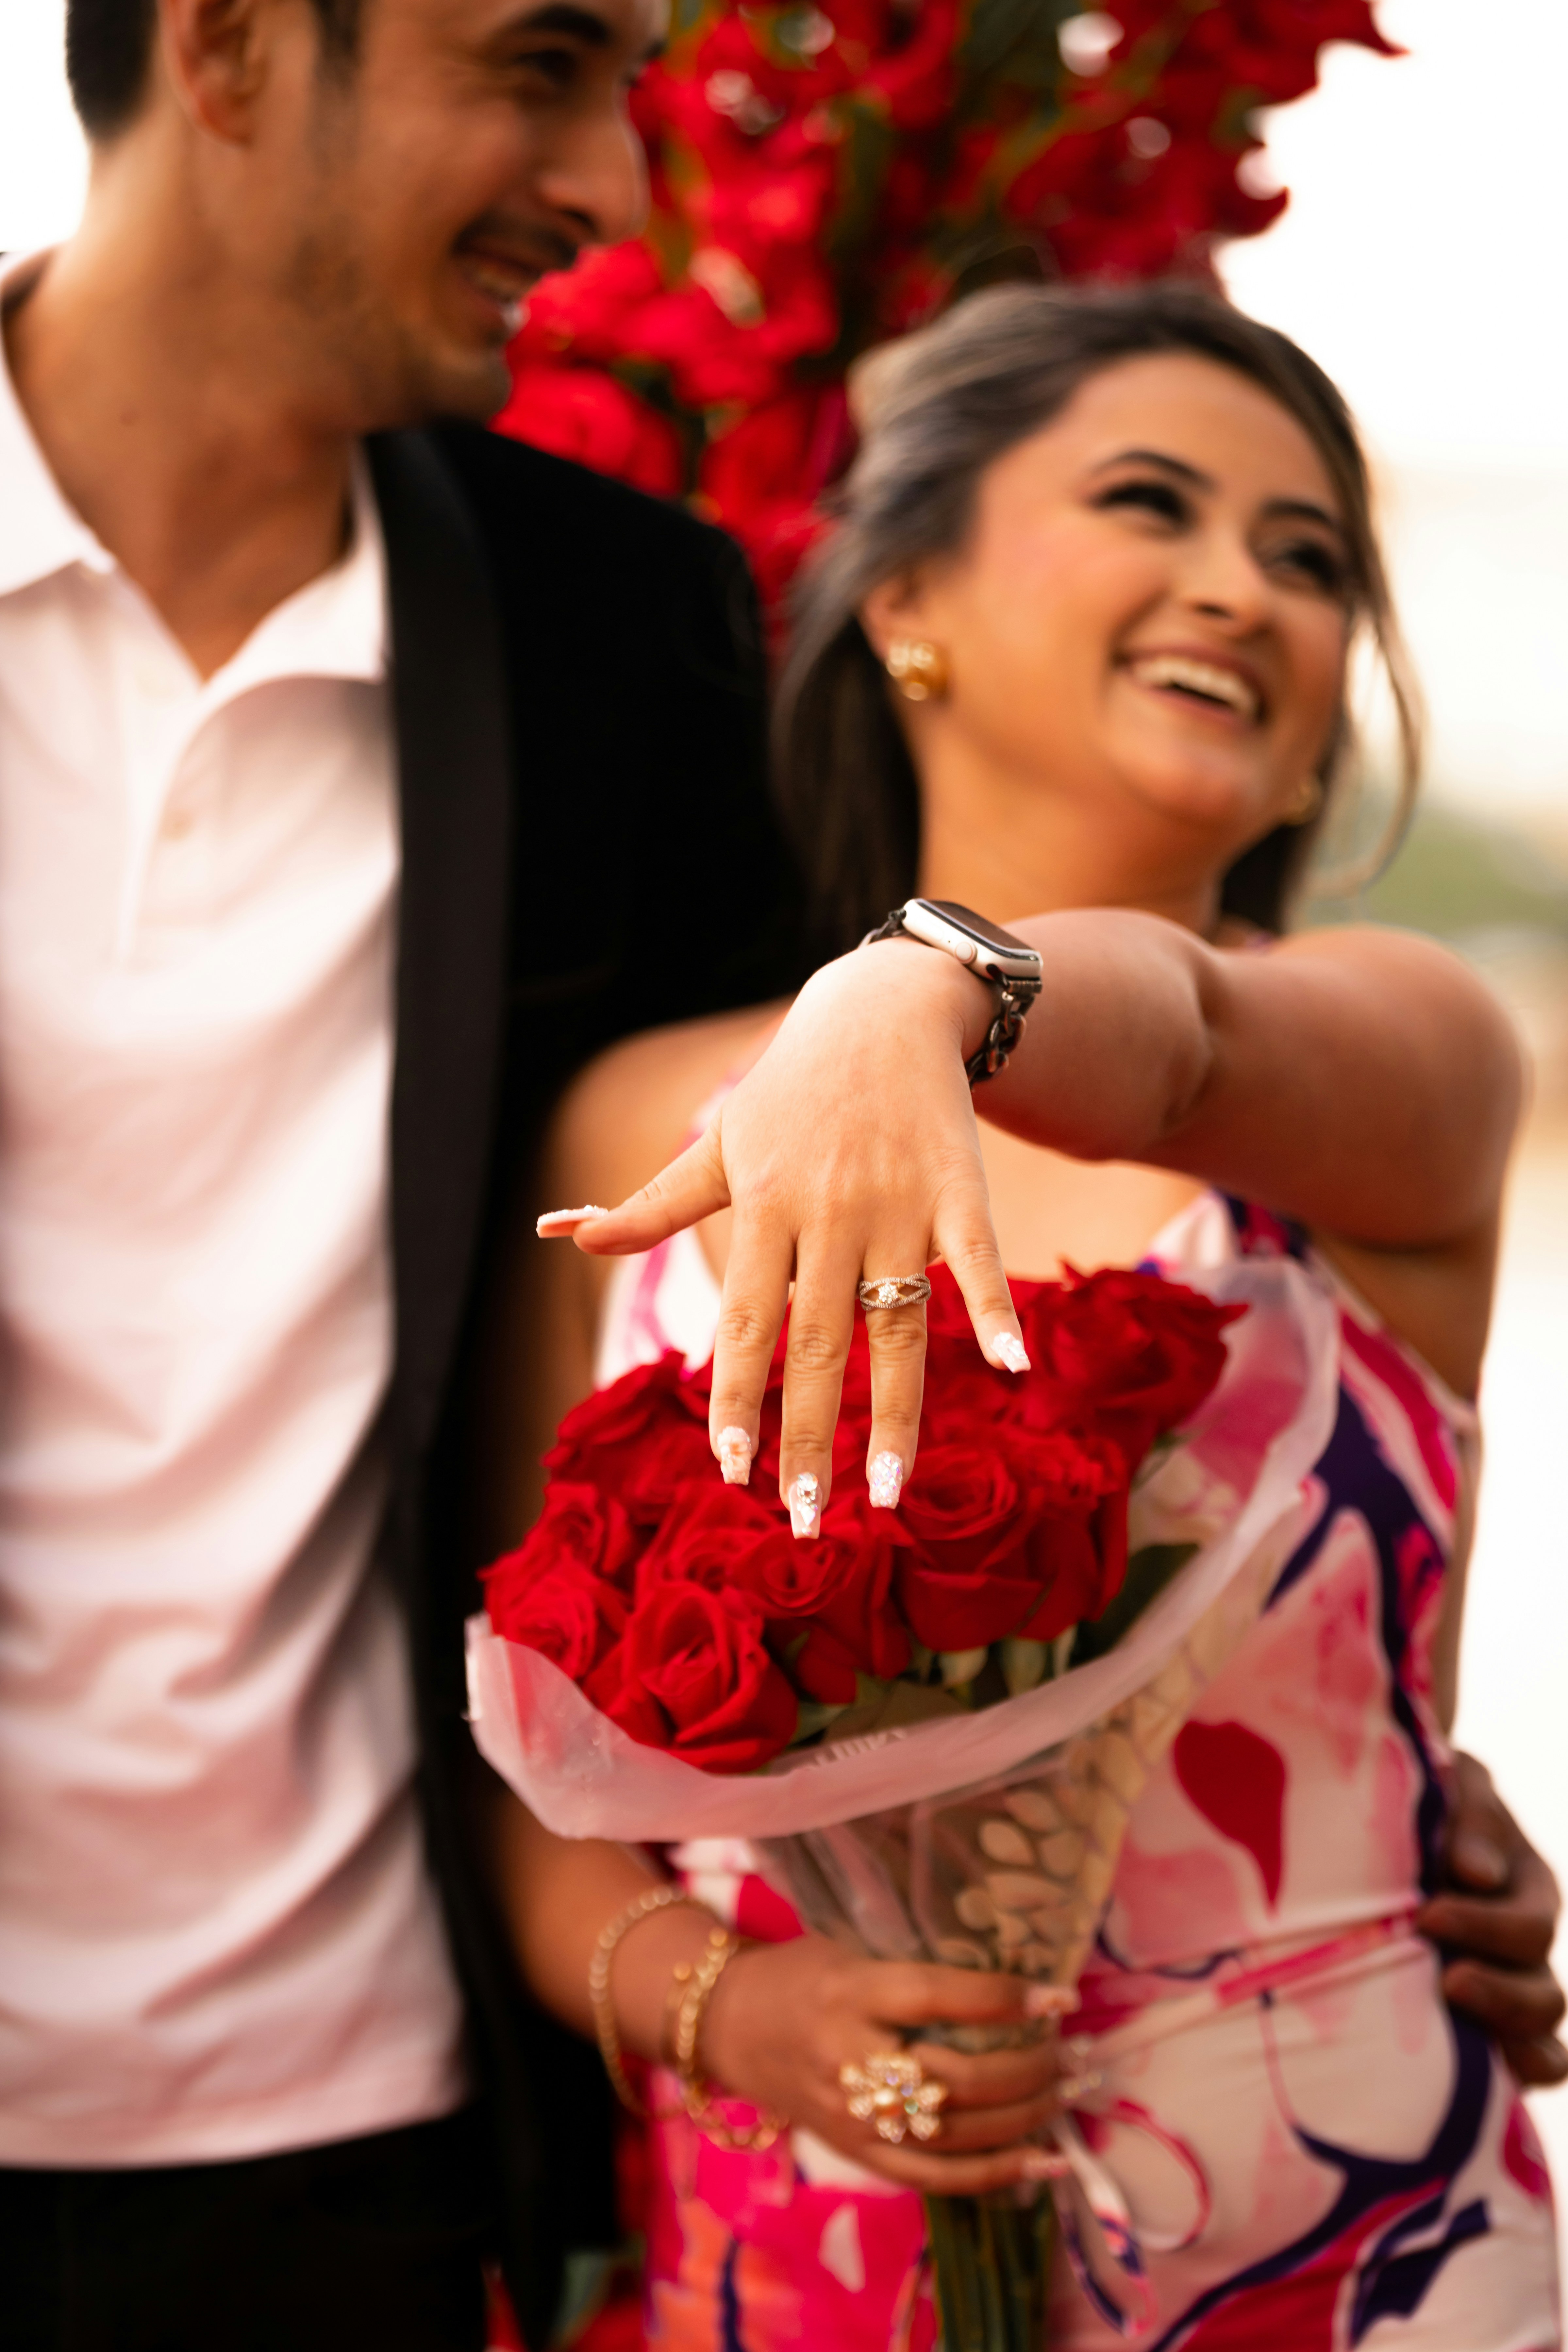 great photo recipe,how to photograph a man holding a bouquet of red roses next to a woman